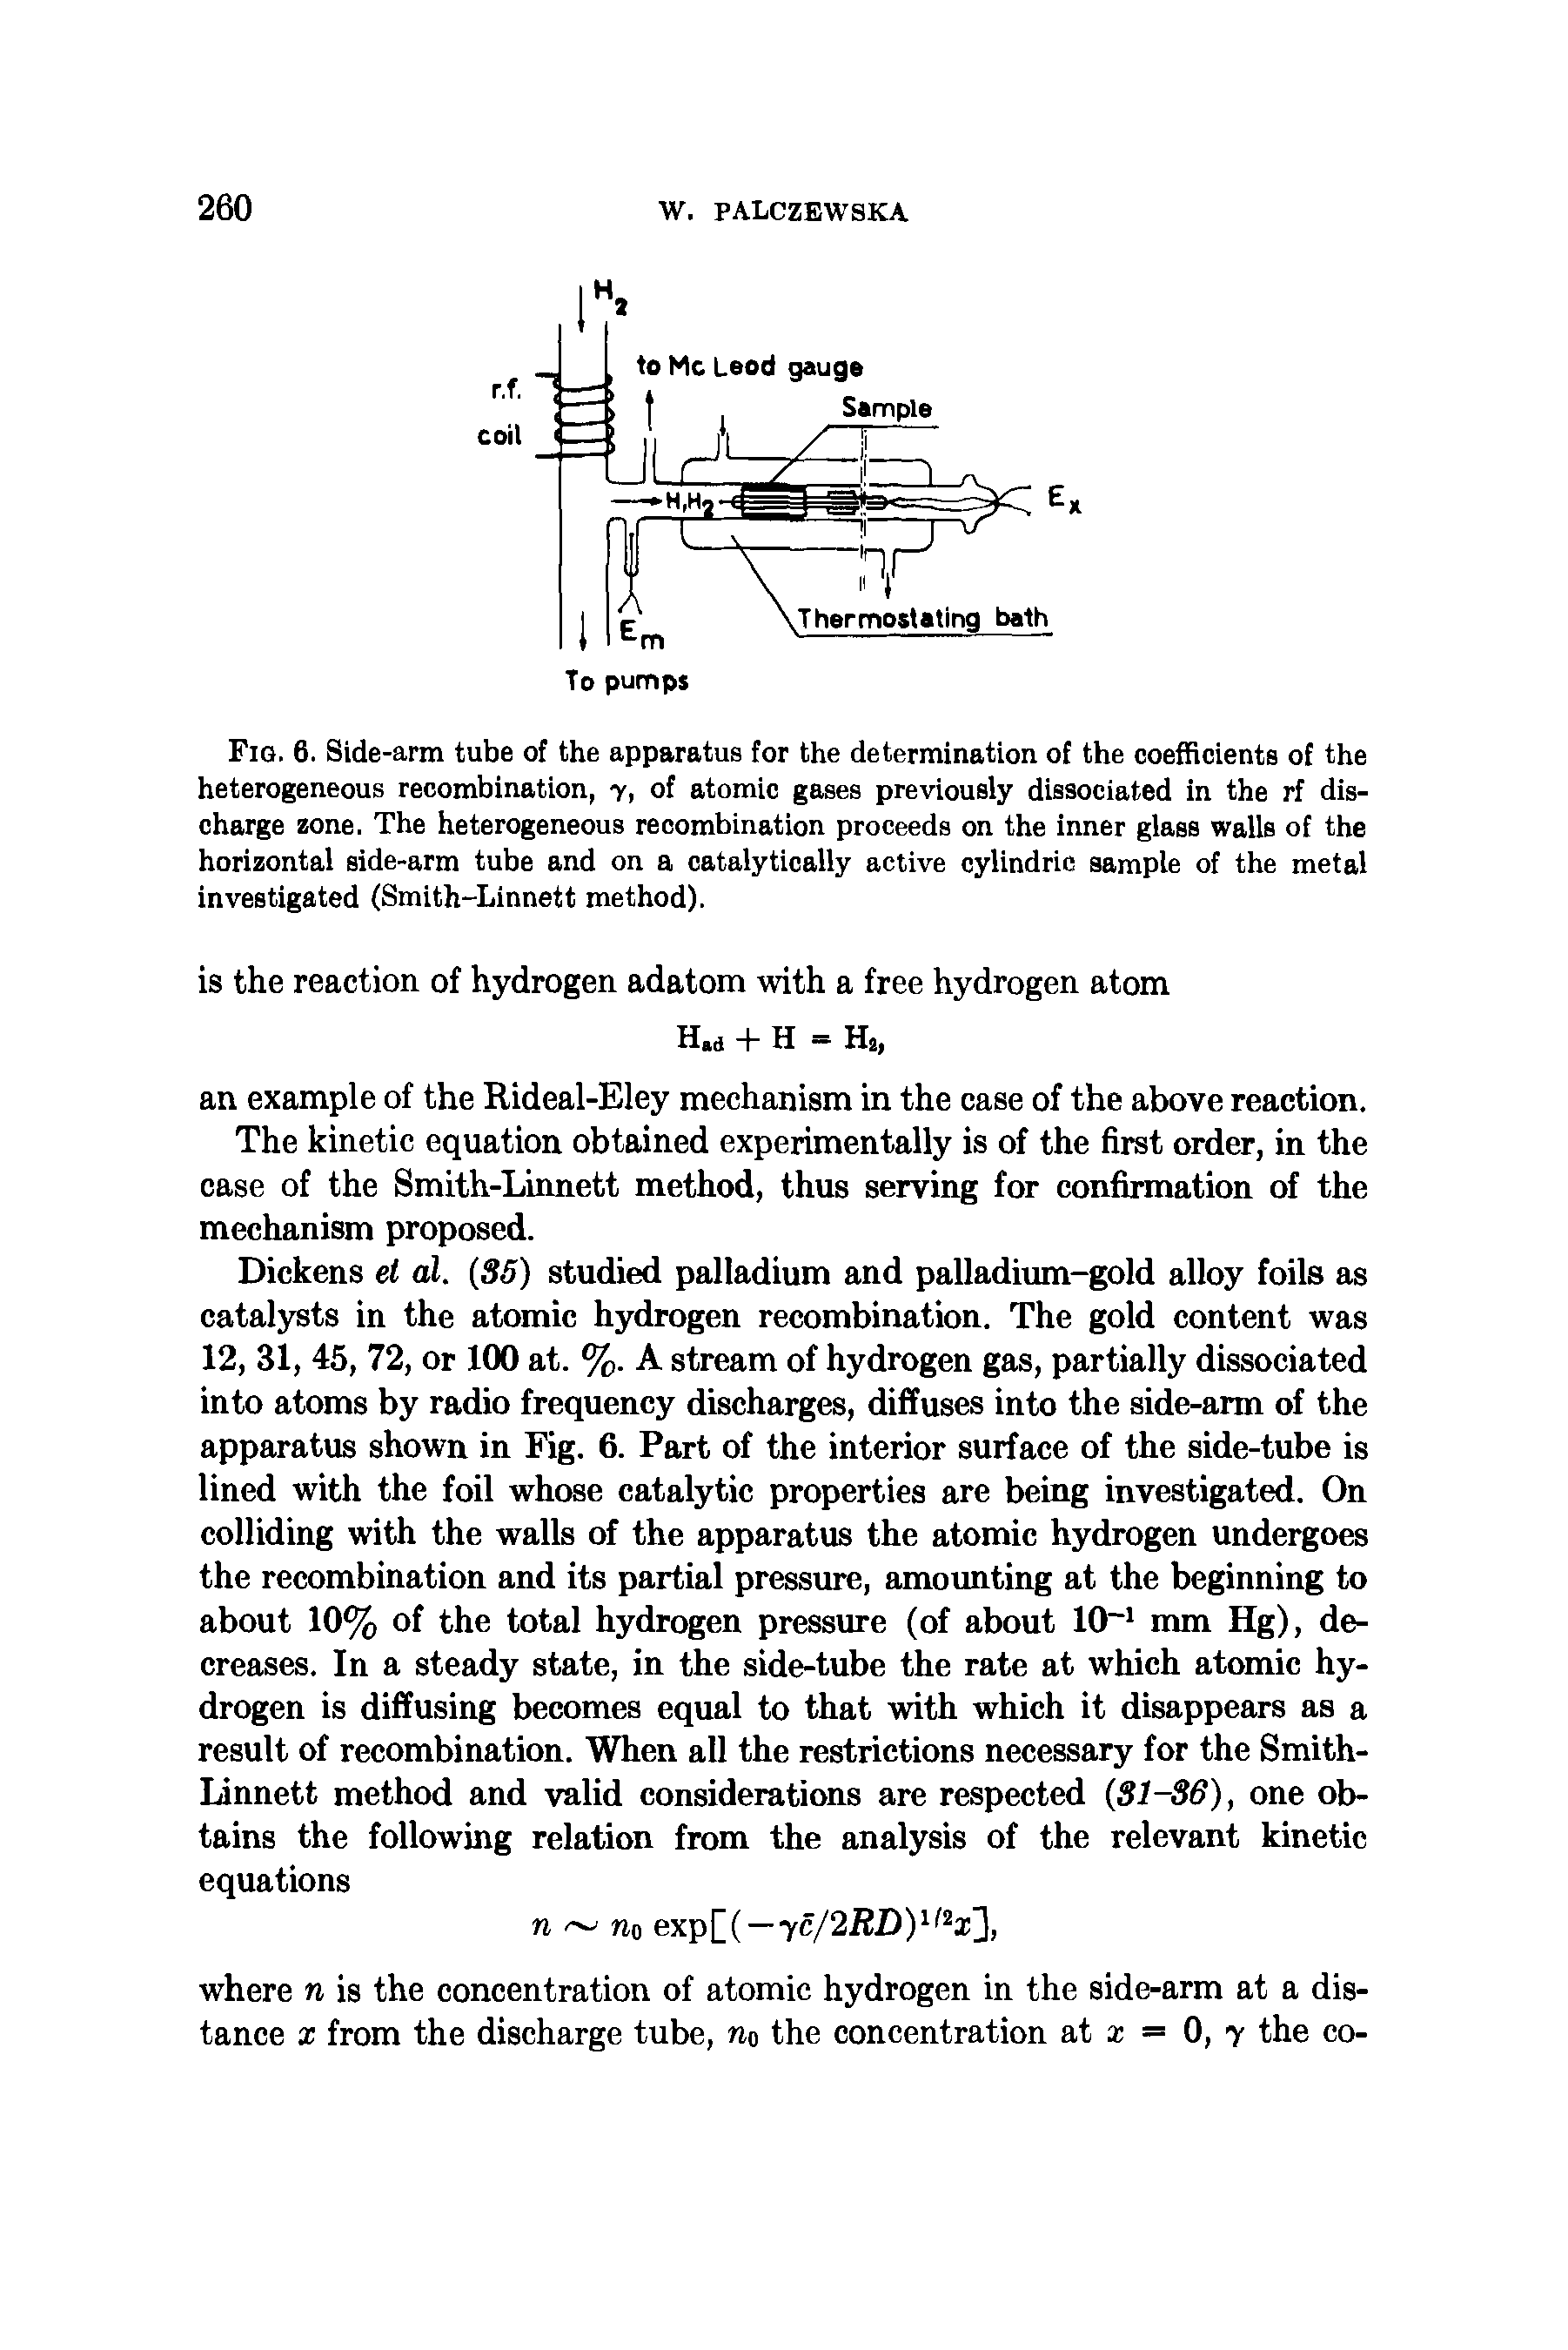 Fig. 6. Side-arm tube of the apparatus for the determination of the coefficients of the heterogeneous recombination, y, of atomic gases previously dissociated in the rf discharge zone. The heterogeneous recombination proceeds on the inner glass walls of the horizontal side-arm tube and on a catalytically active cylindric sample of the metal investigated (Smith-Linnett method).